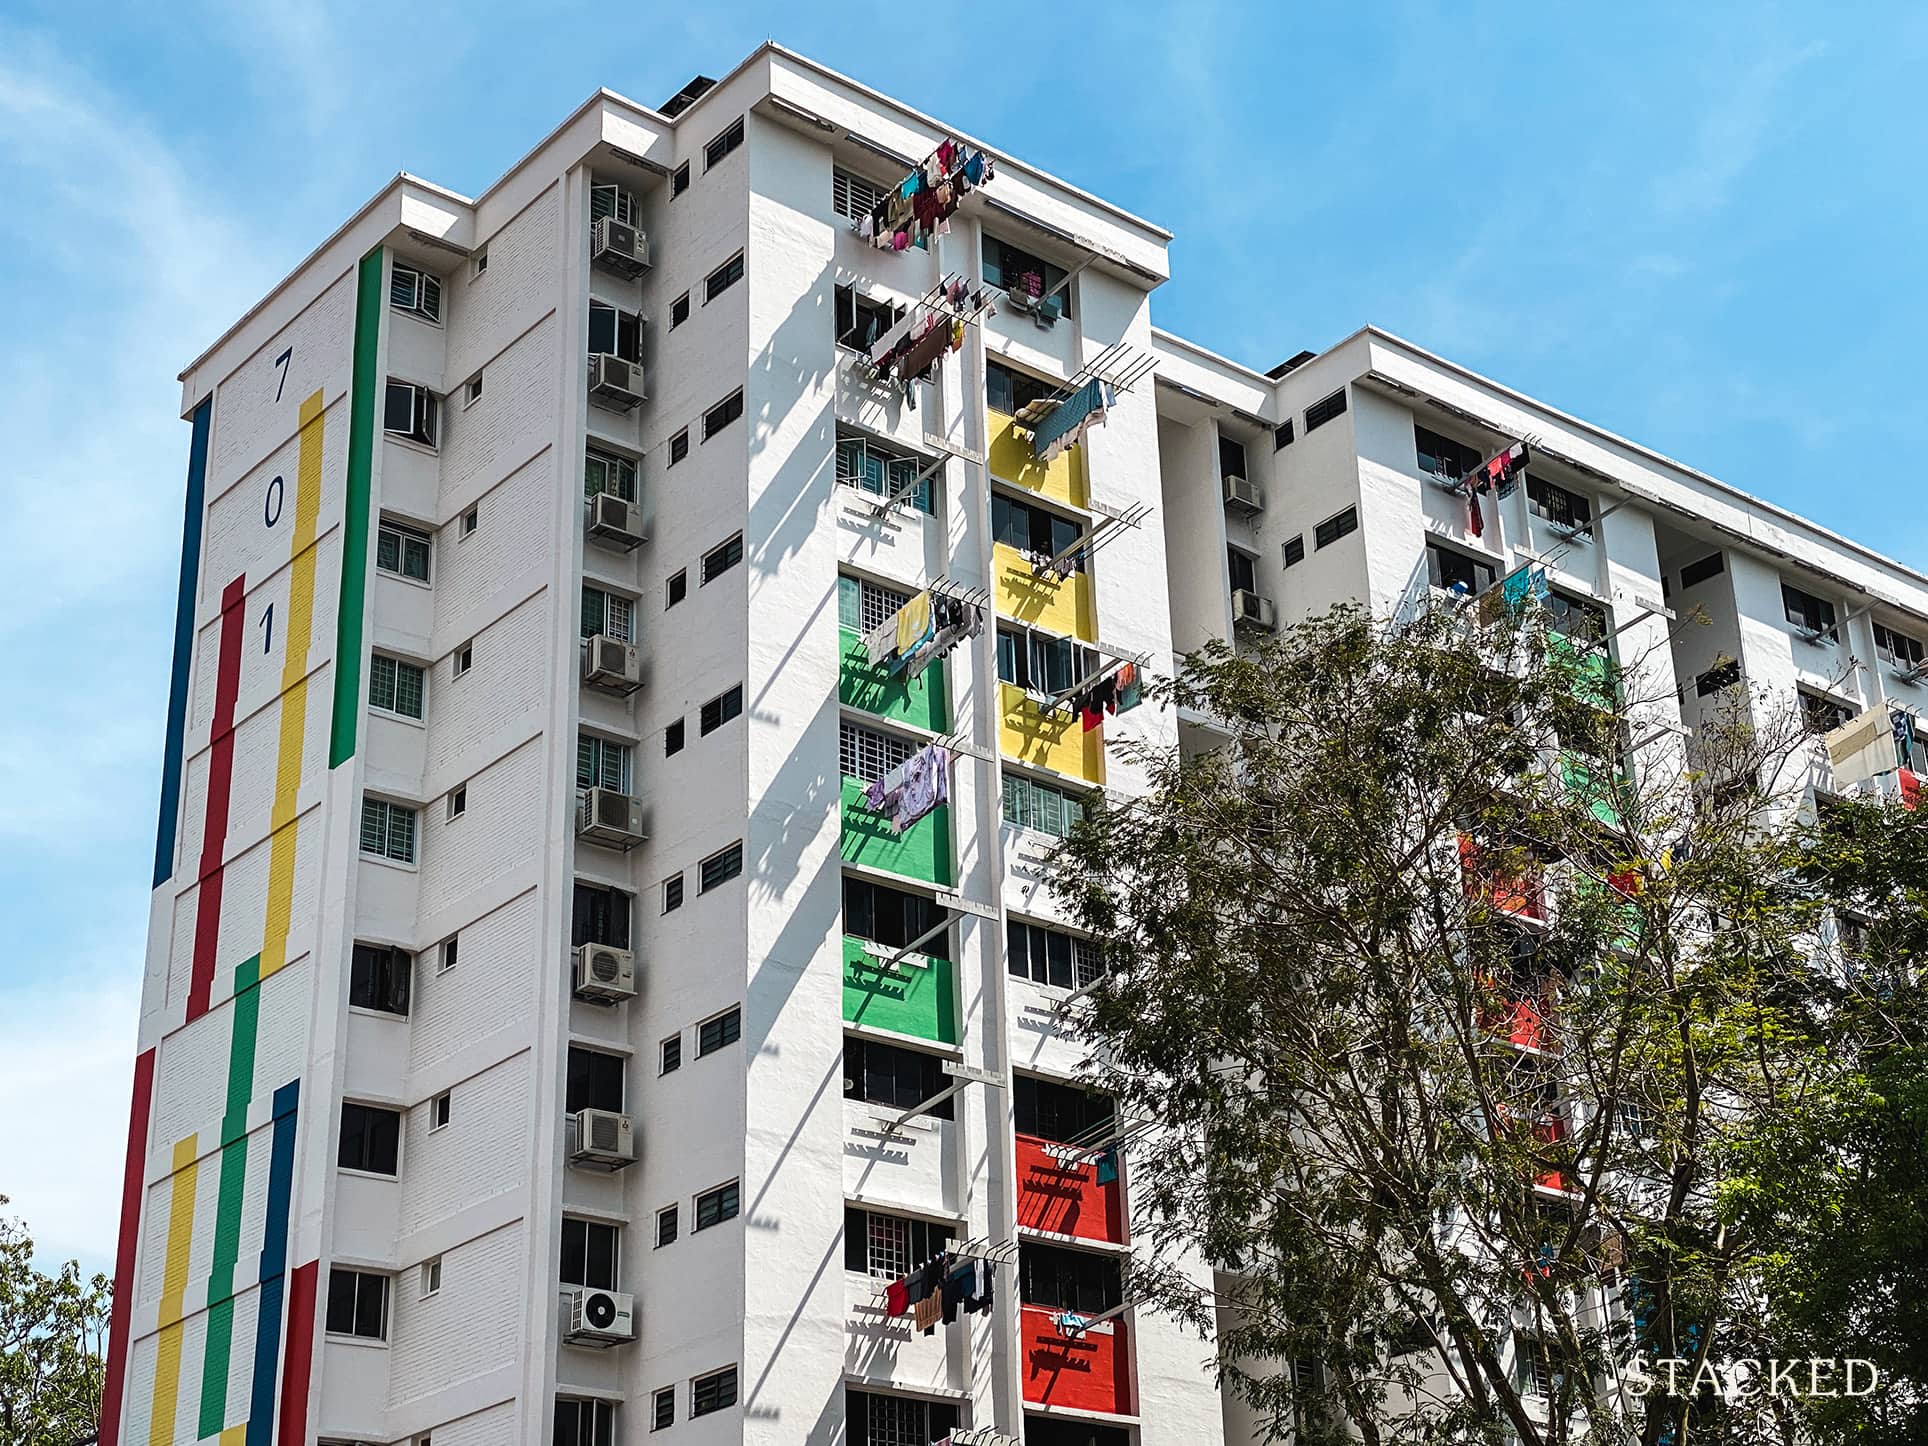 Cheapest Condos And HDBs In Singapore: Here’s How Much Prices Have Risen Since 2020